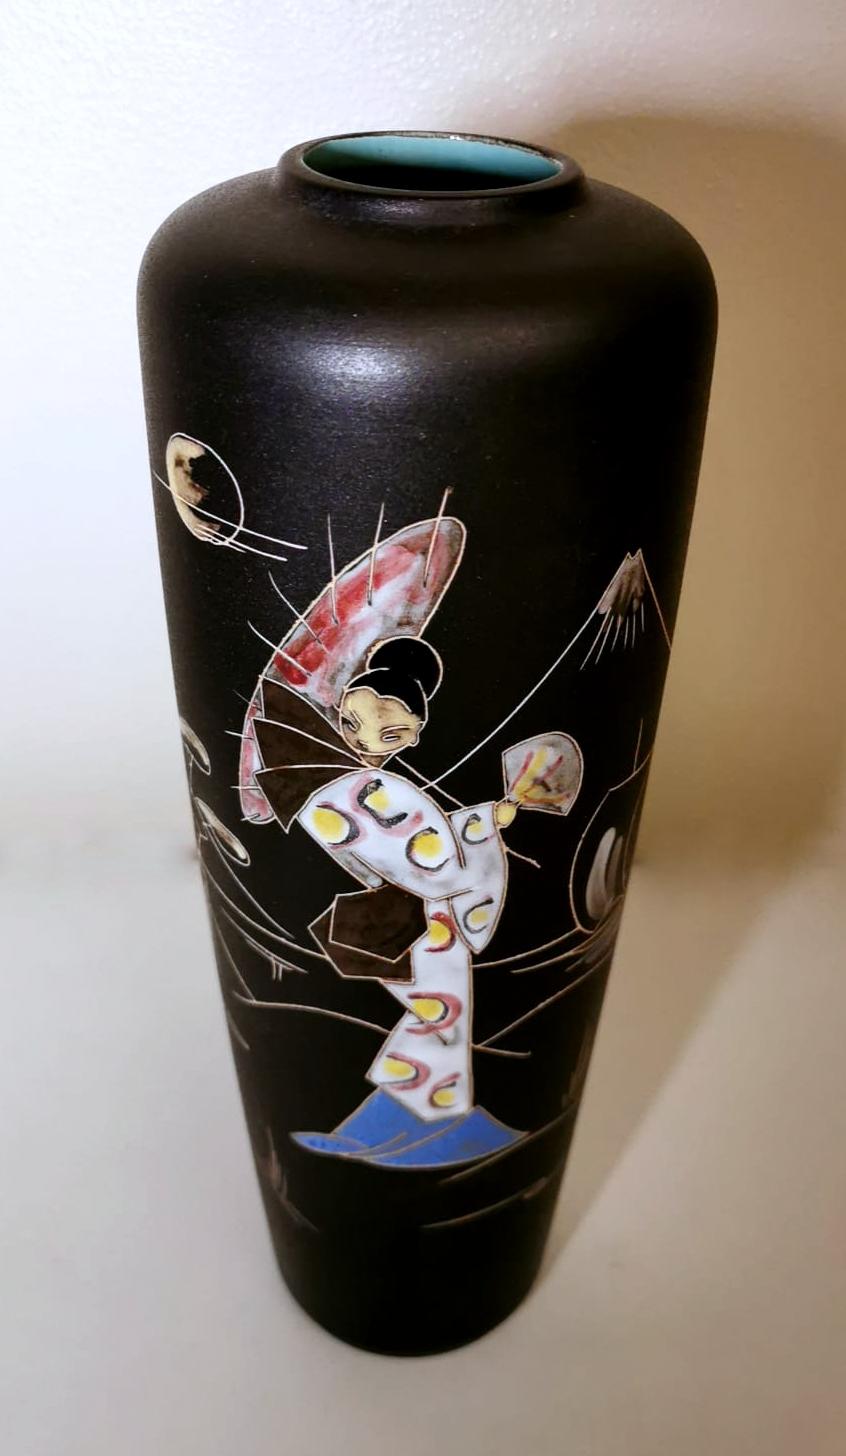 We kindly suggest you read the whole description, because with it we try to give you detailed technical and historical information to guarantee the authenticity of our objects.
Black ceramic vase with Japanese decoration painted and enameled in